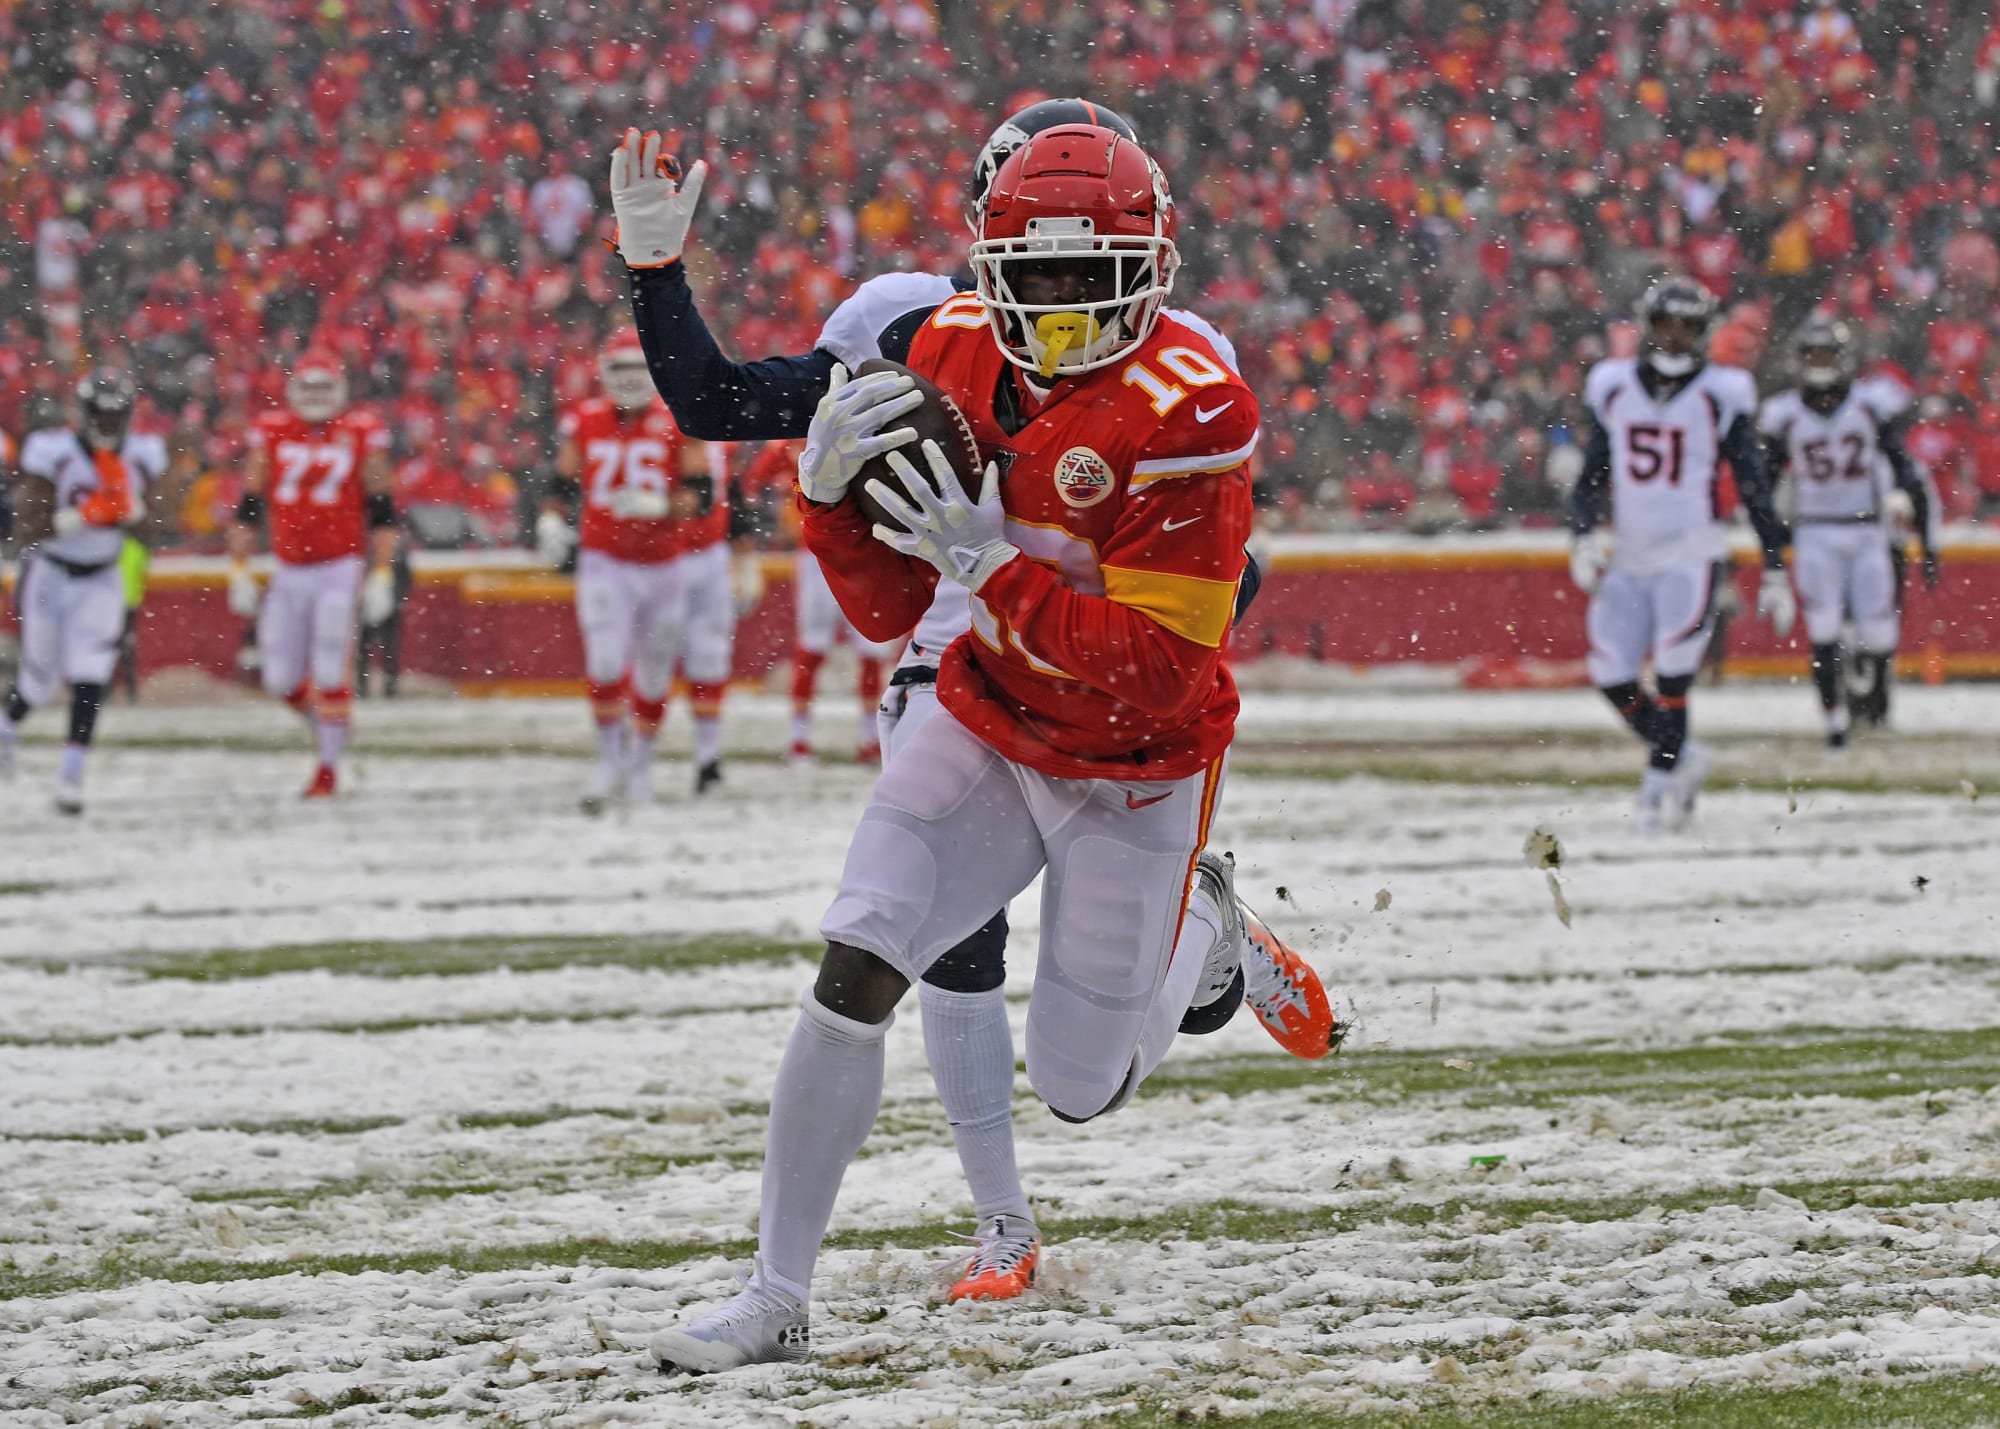 Tyreek Hill's touchdown leads Top 5 plays from Broncos vs. Chiefs